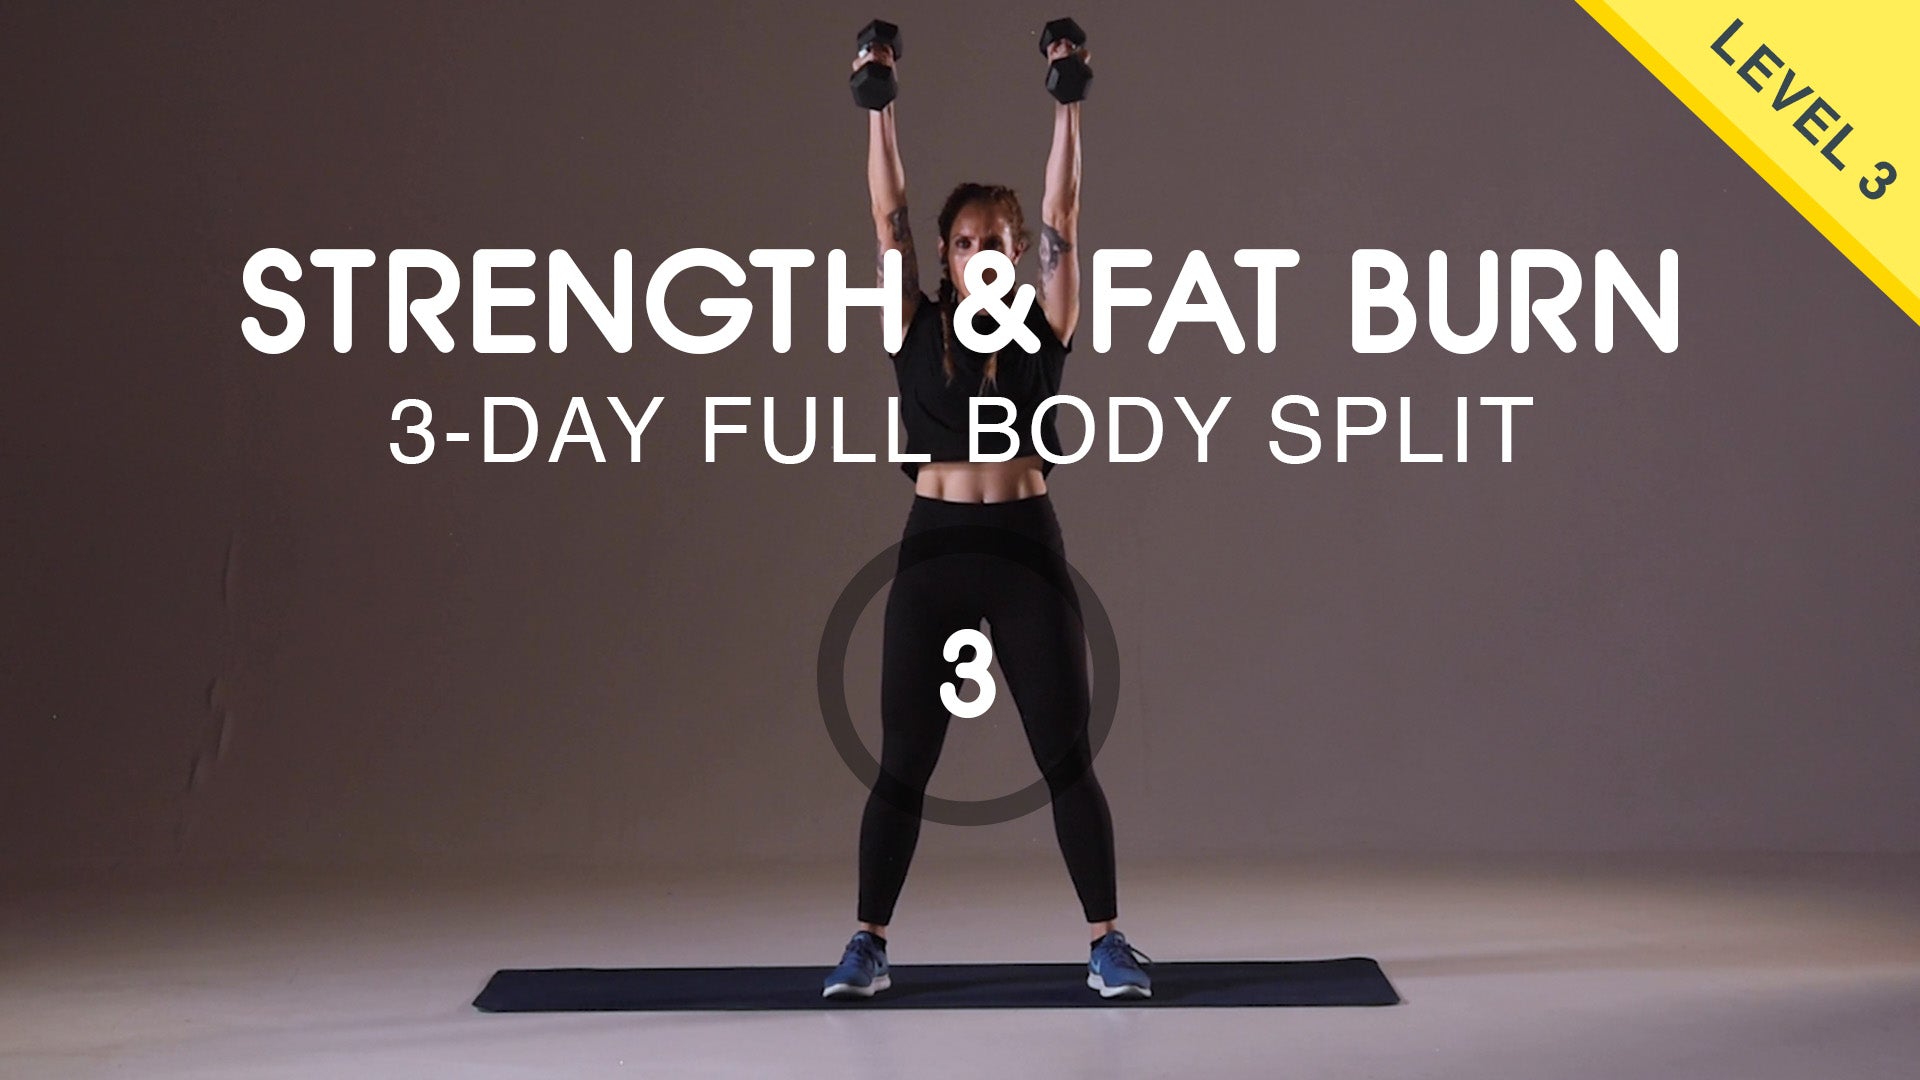 Free Full Body HIIT Workouts - Full Length Videos – Group HIIT